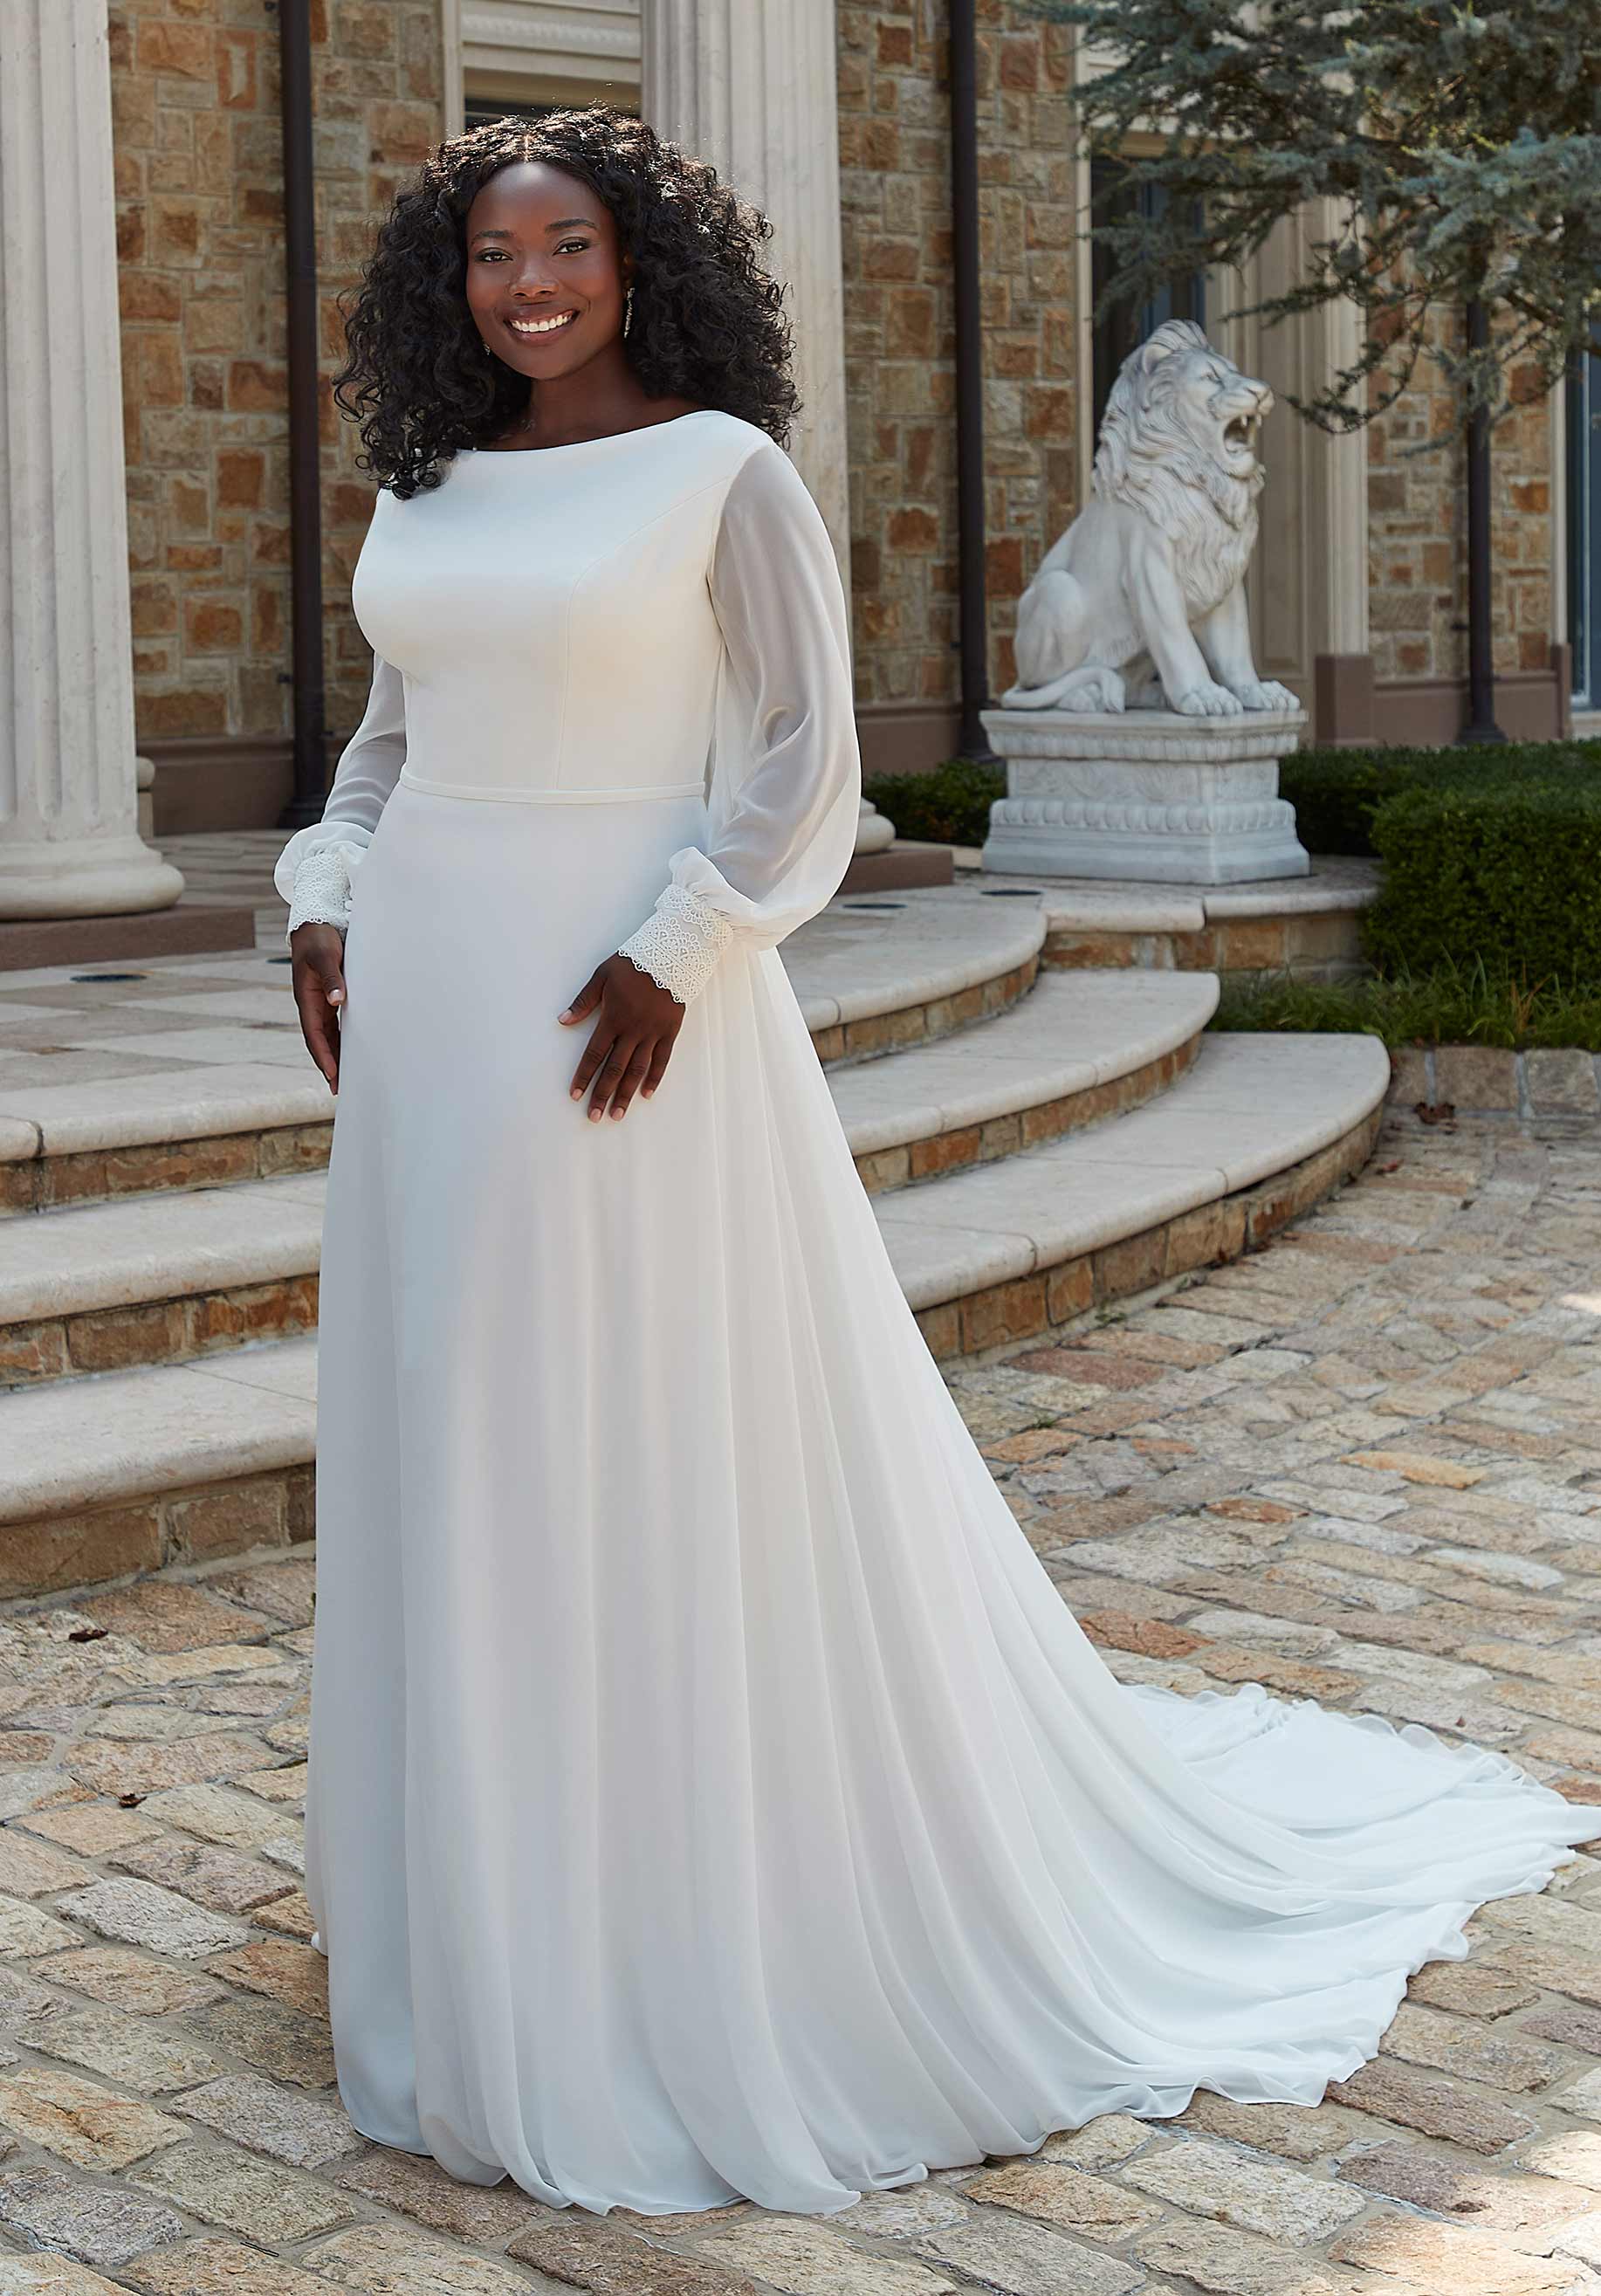 10 Brides Who Wore an Andrea Hawkes Wedding Dress